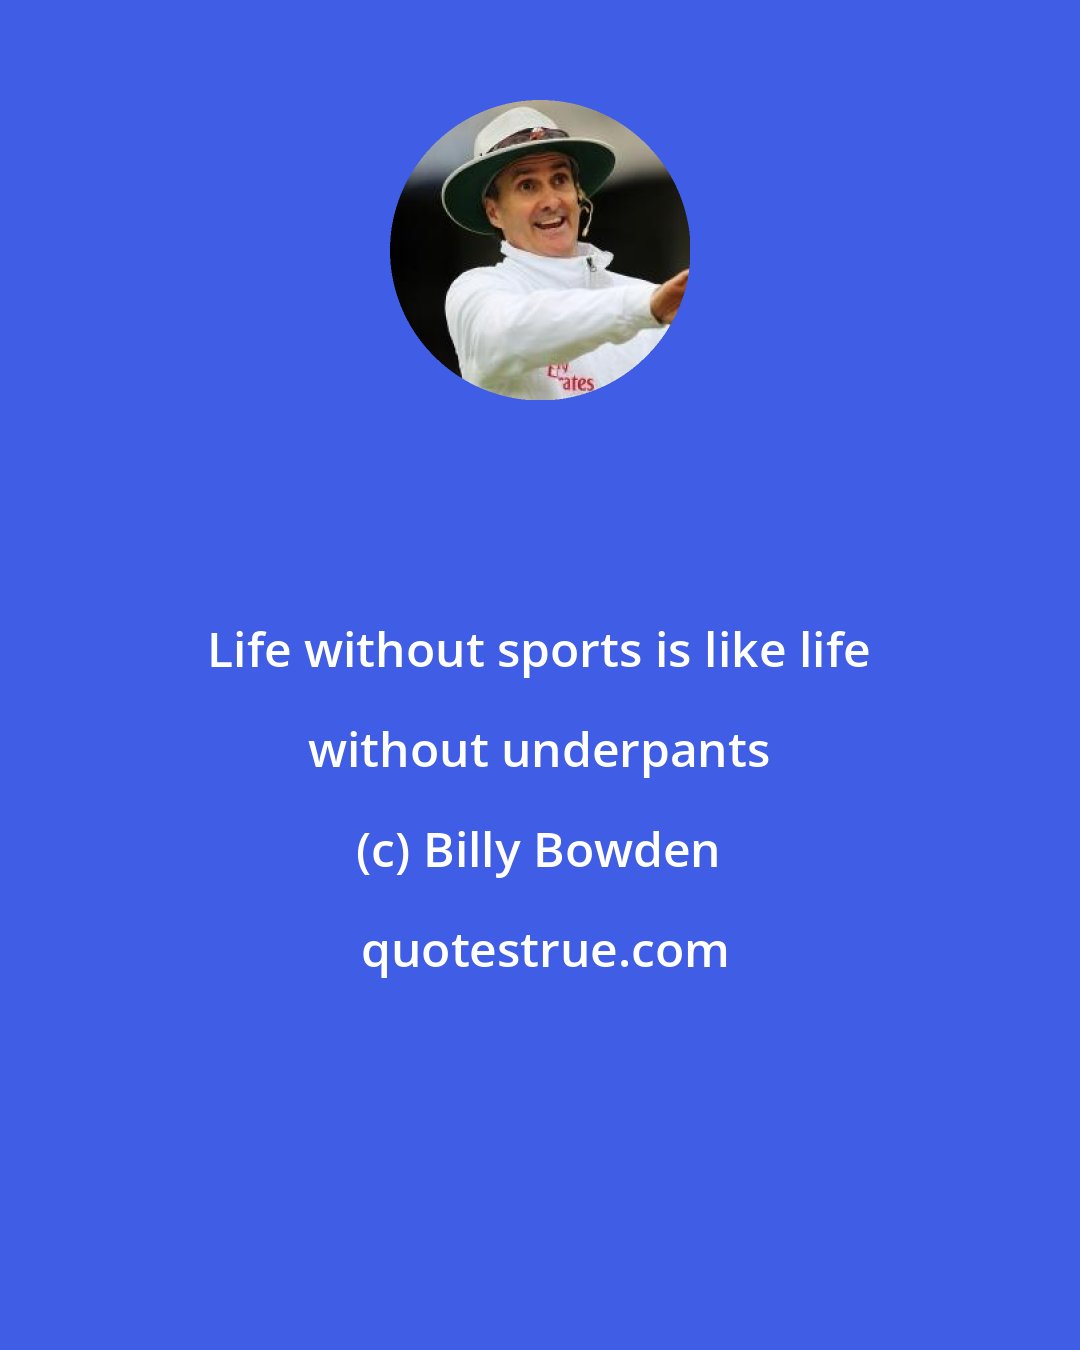 Billy Bowden: Life without sports is like life without underpants